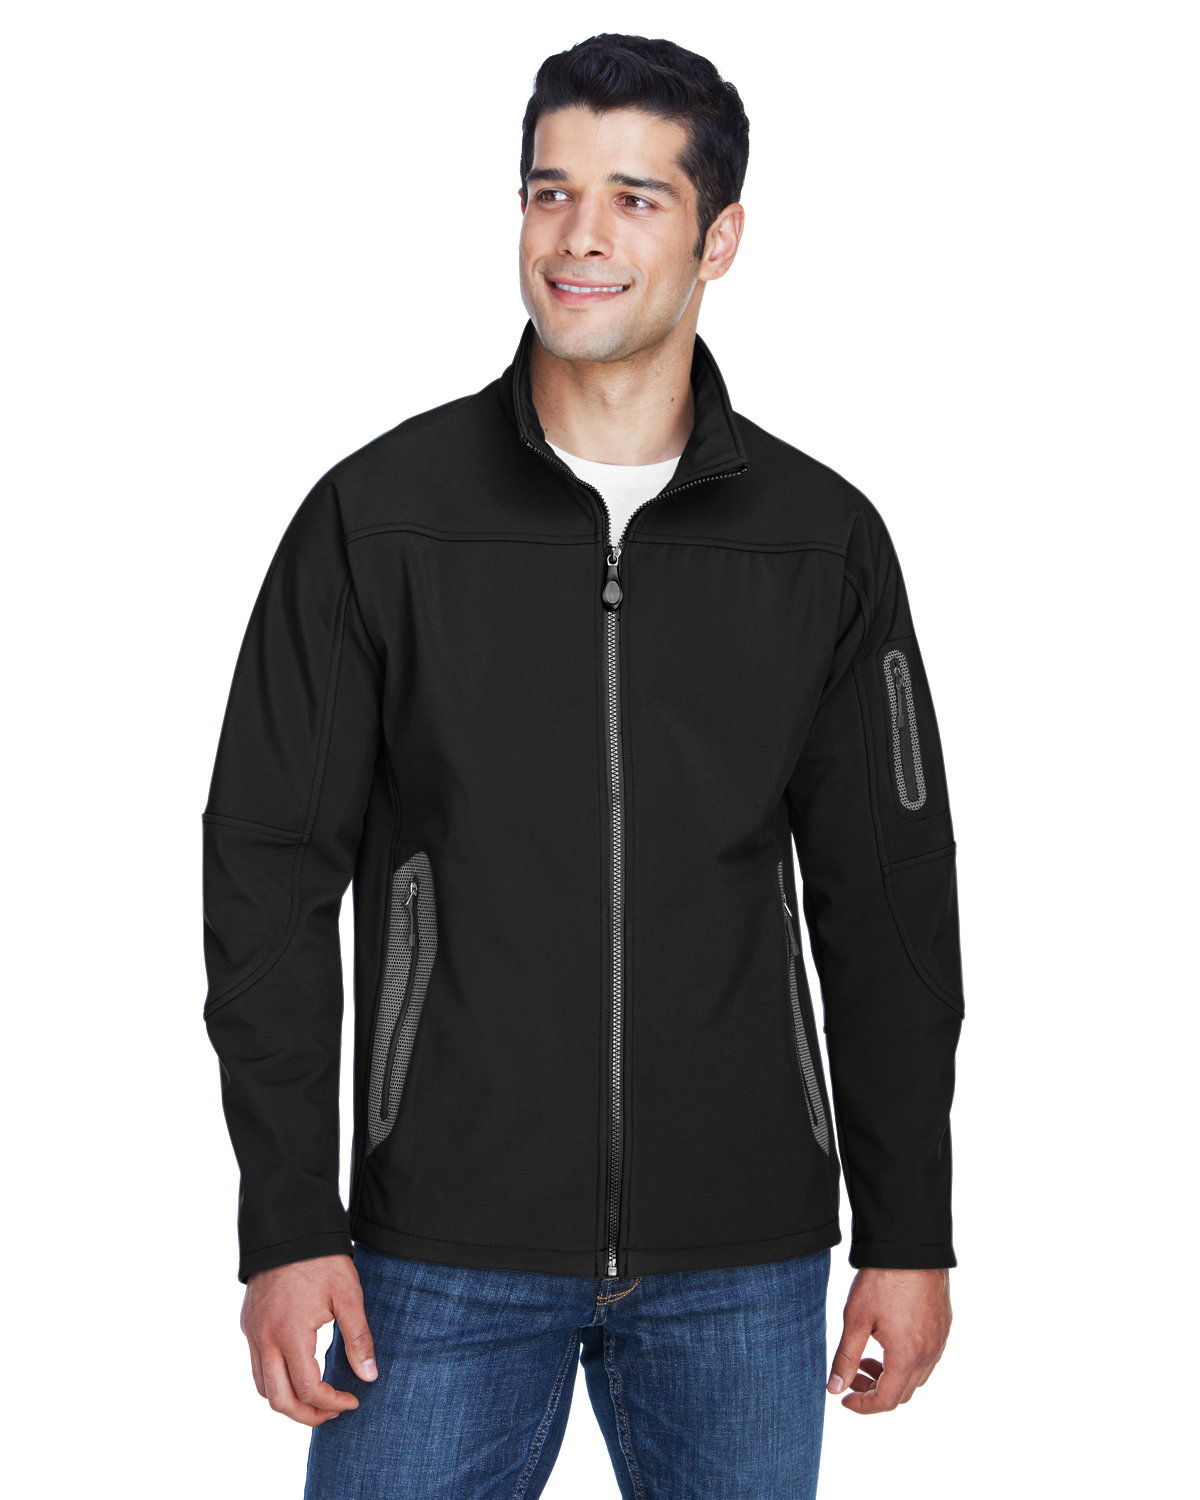 North End 88138 - Men's Three-Layer Fleece Bonded Soft Shell Technical ...